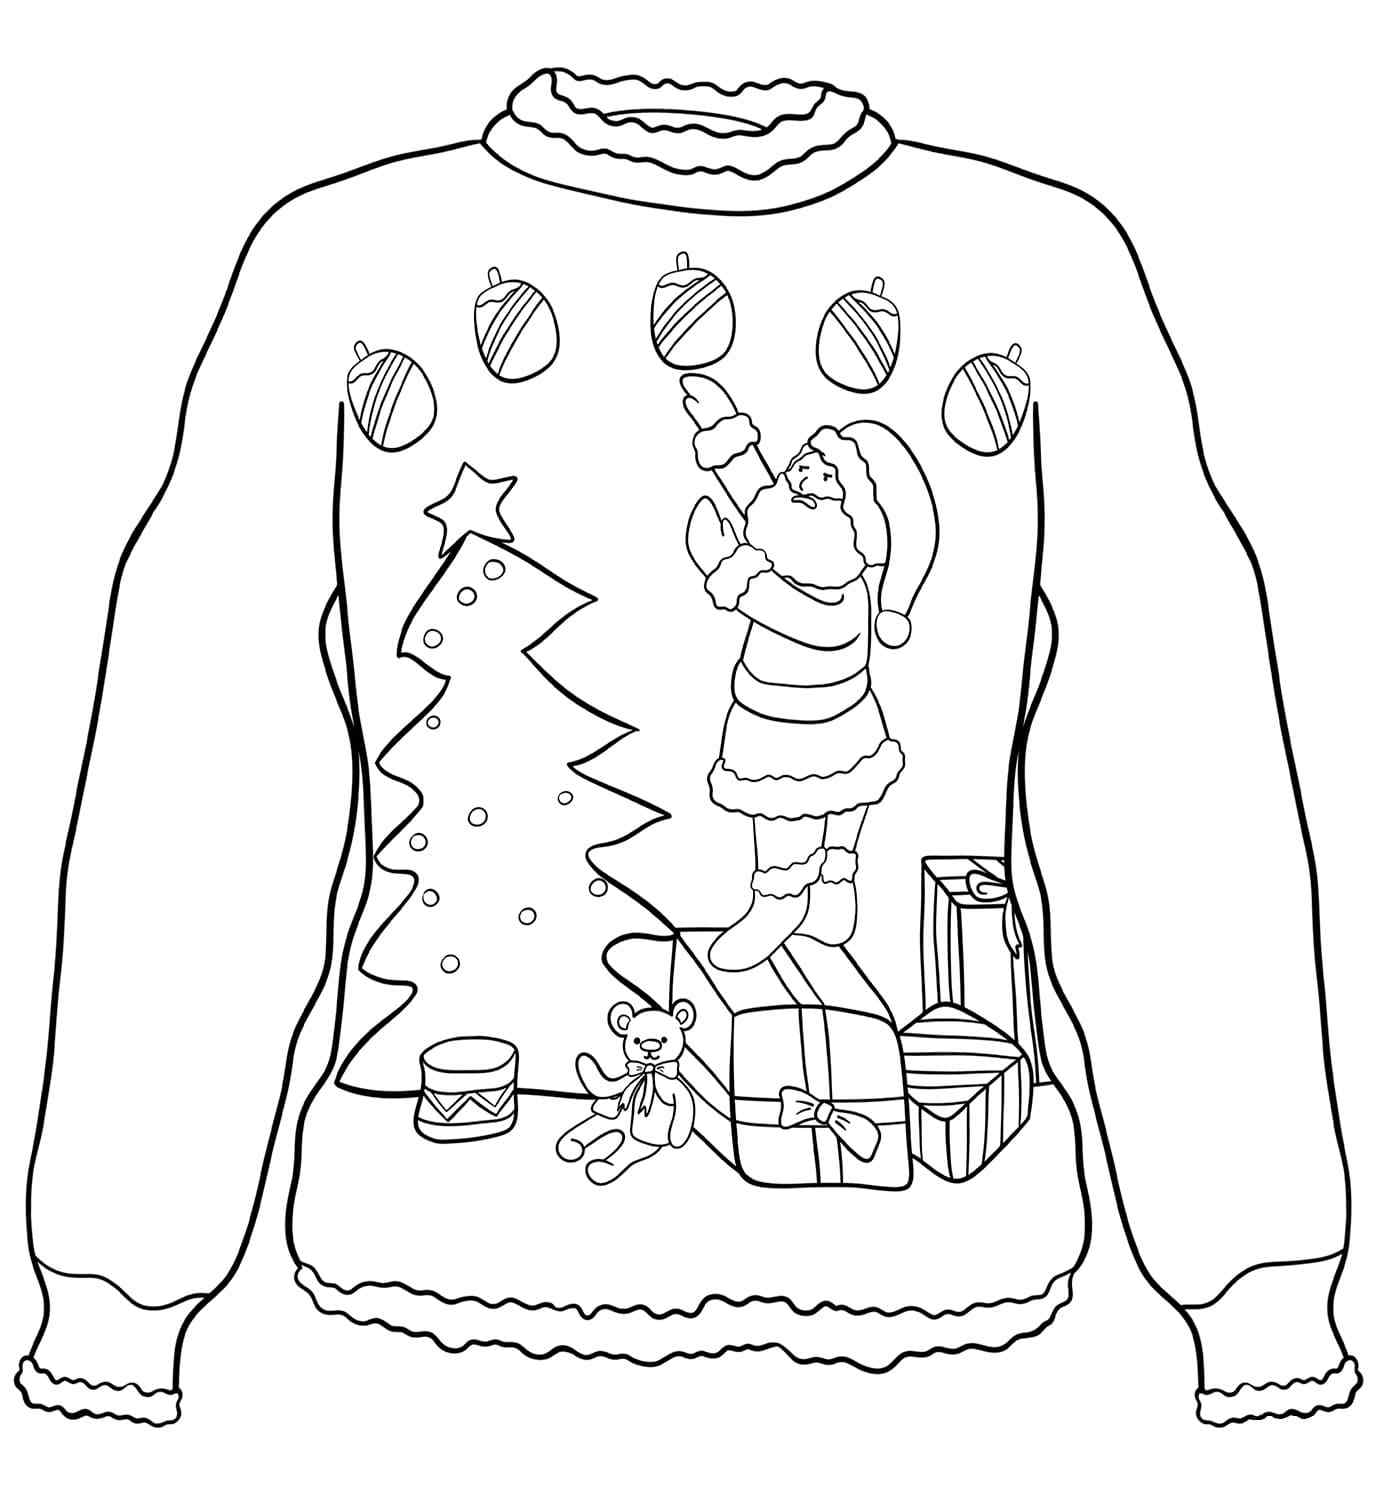 Sweater As Gift For Christmas